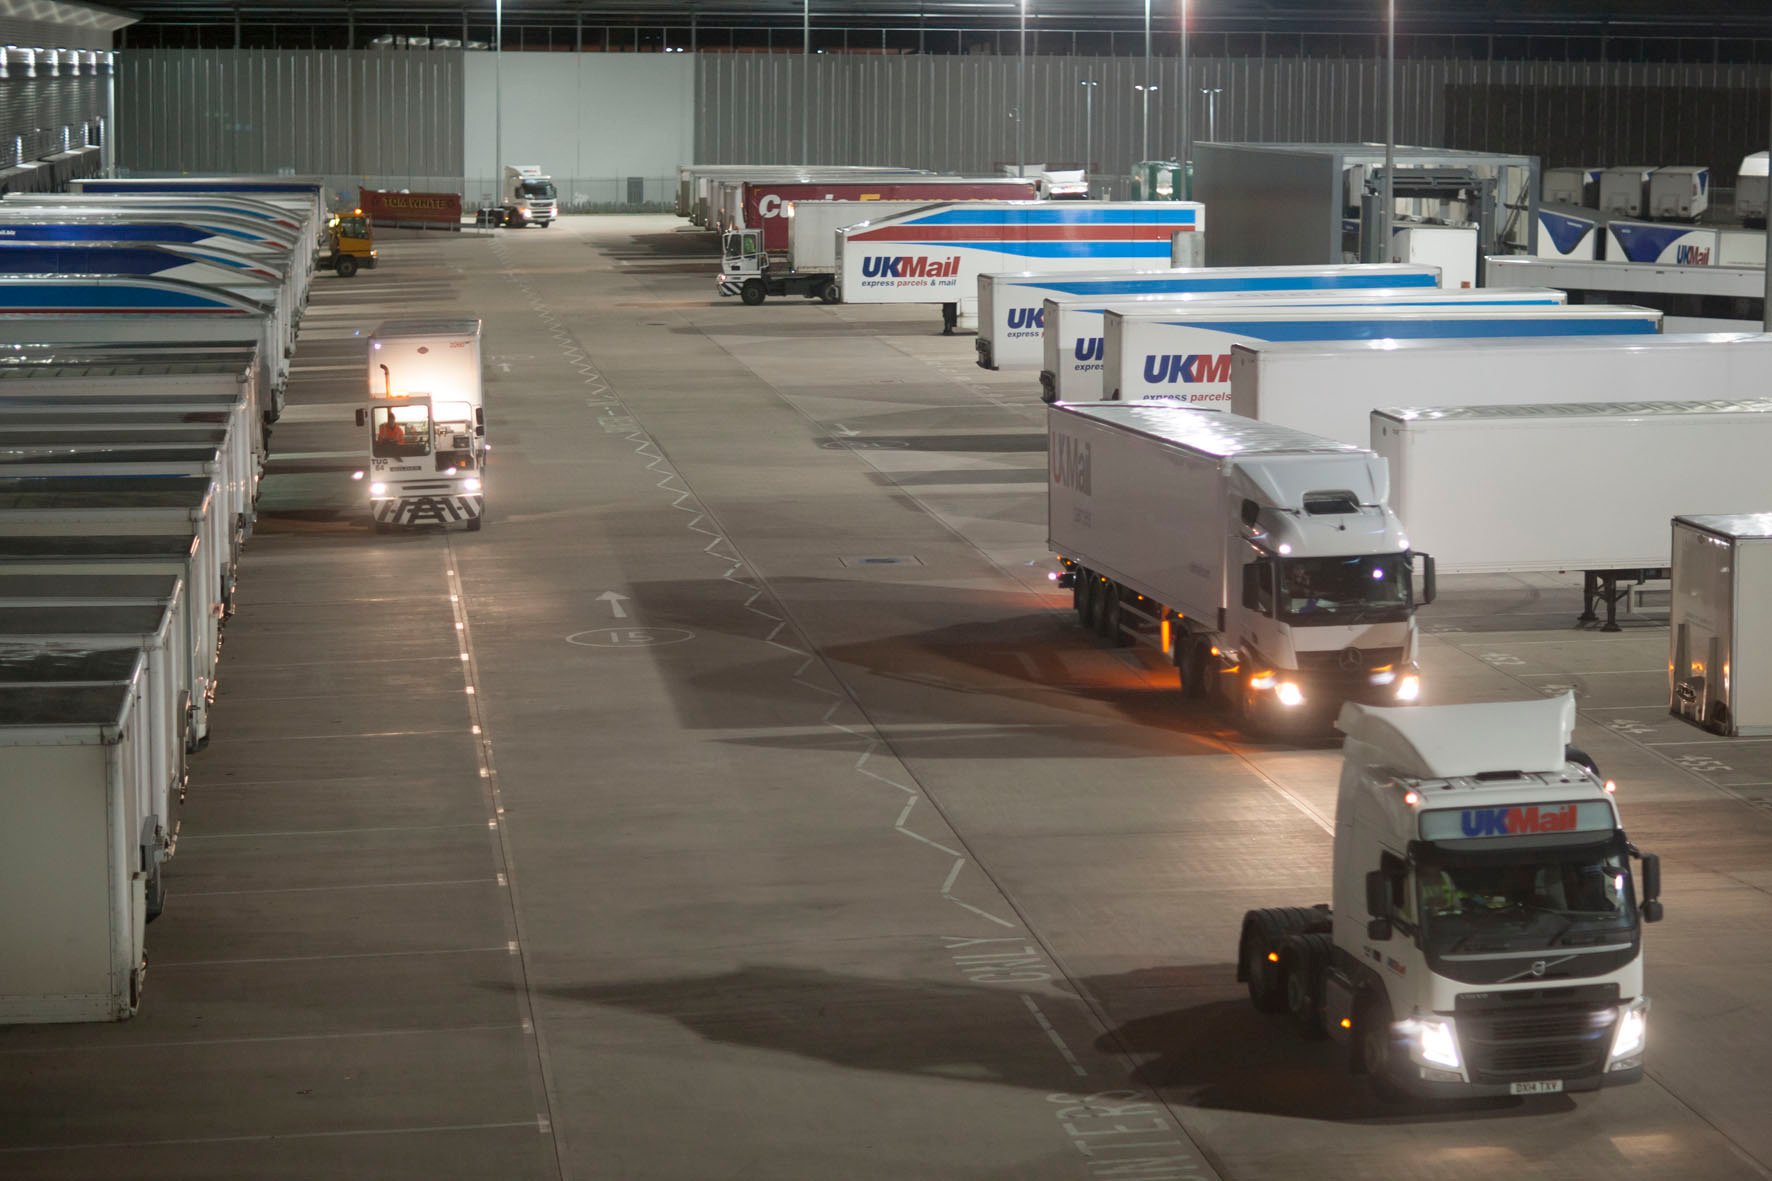 Delivery trucks at a UK Mail hub